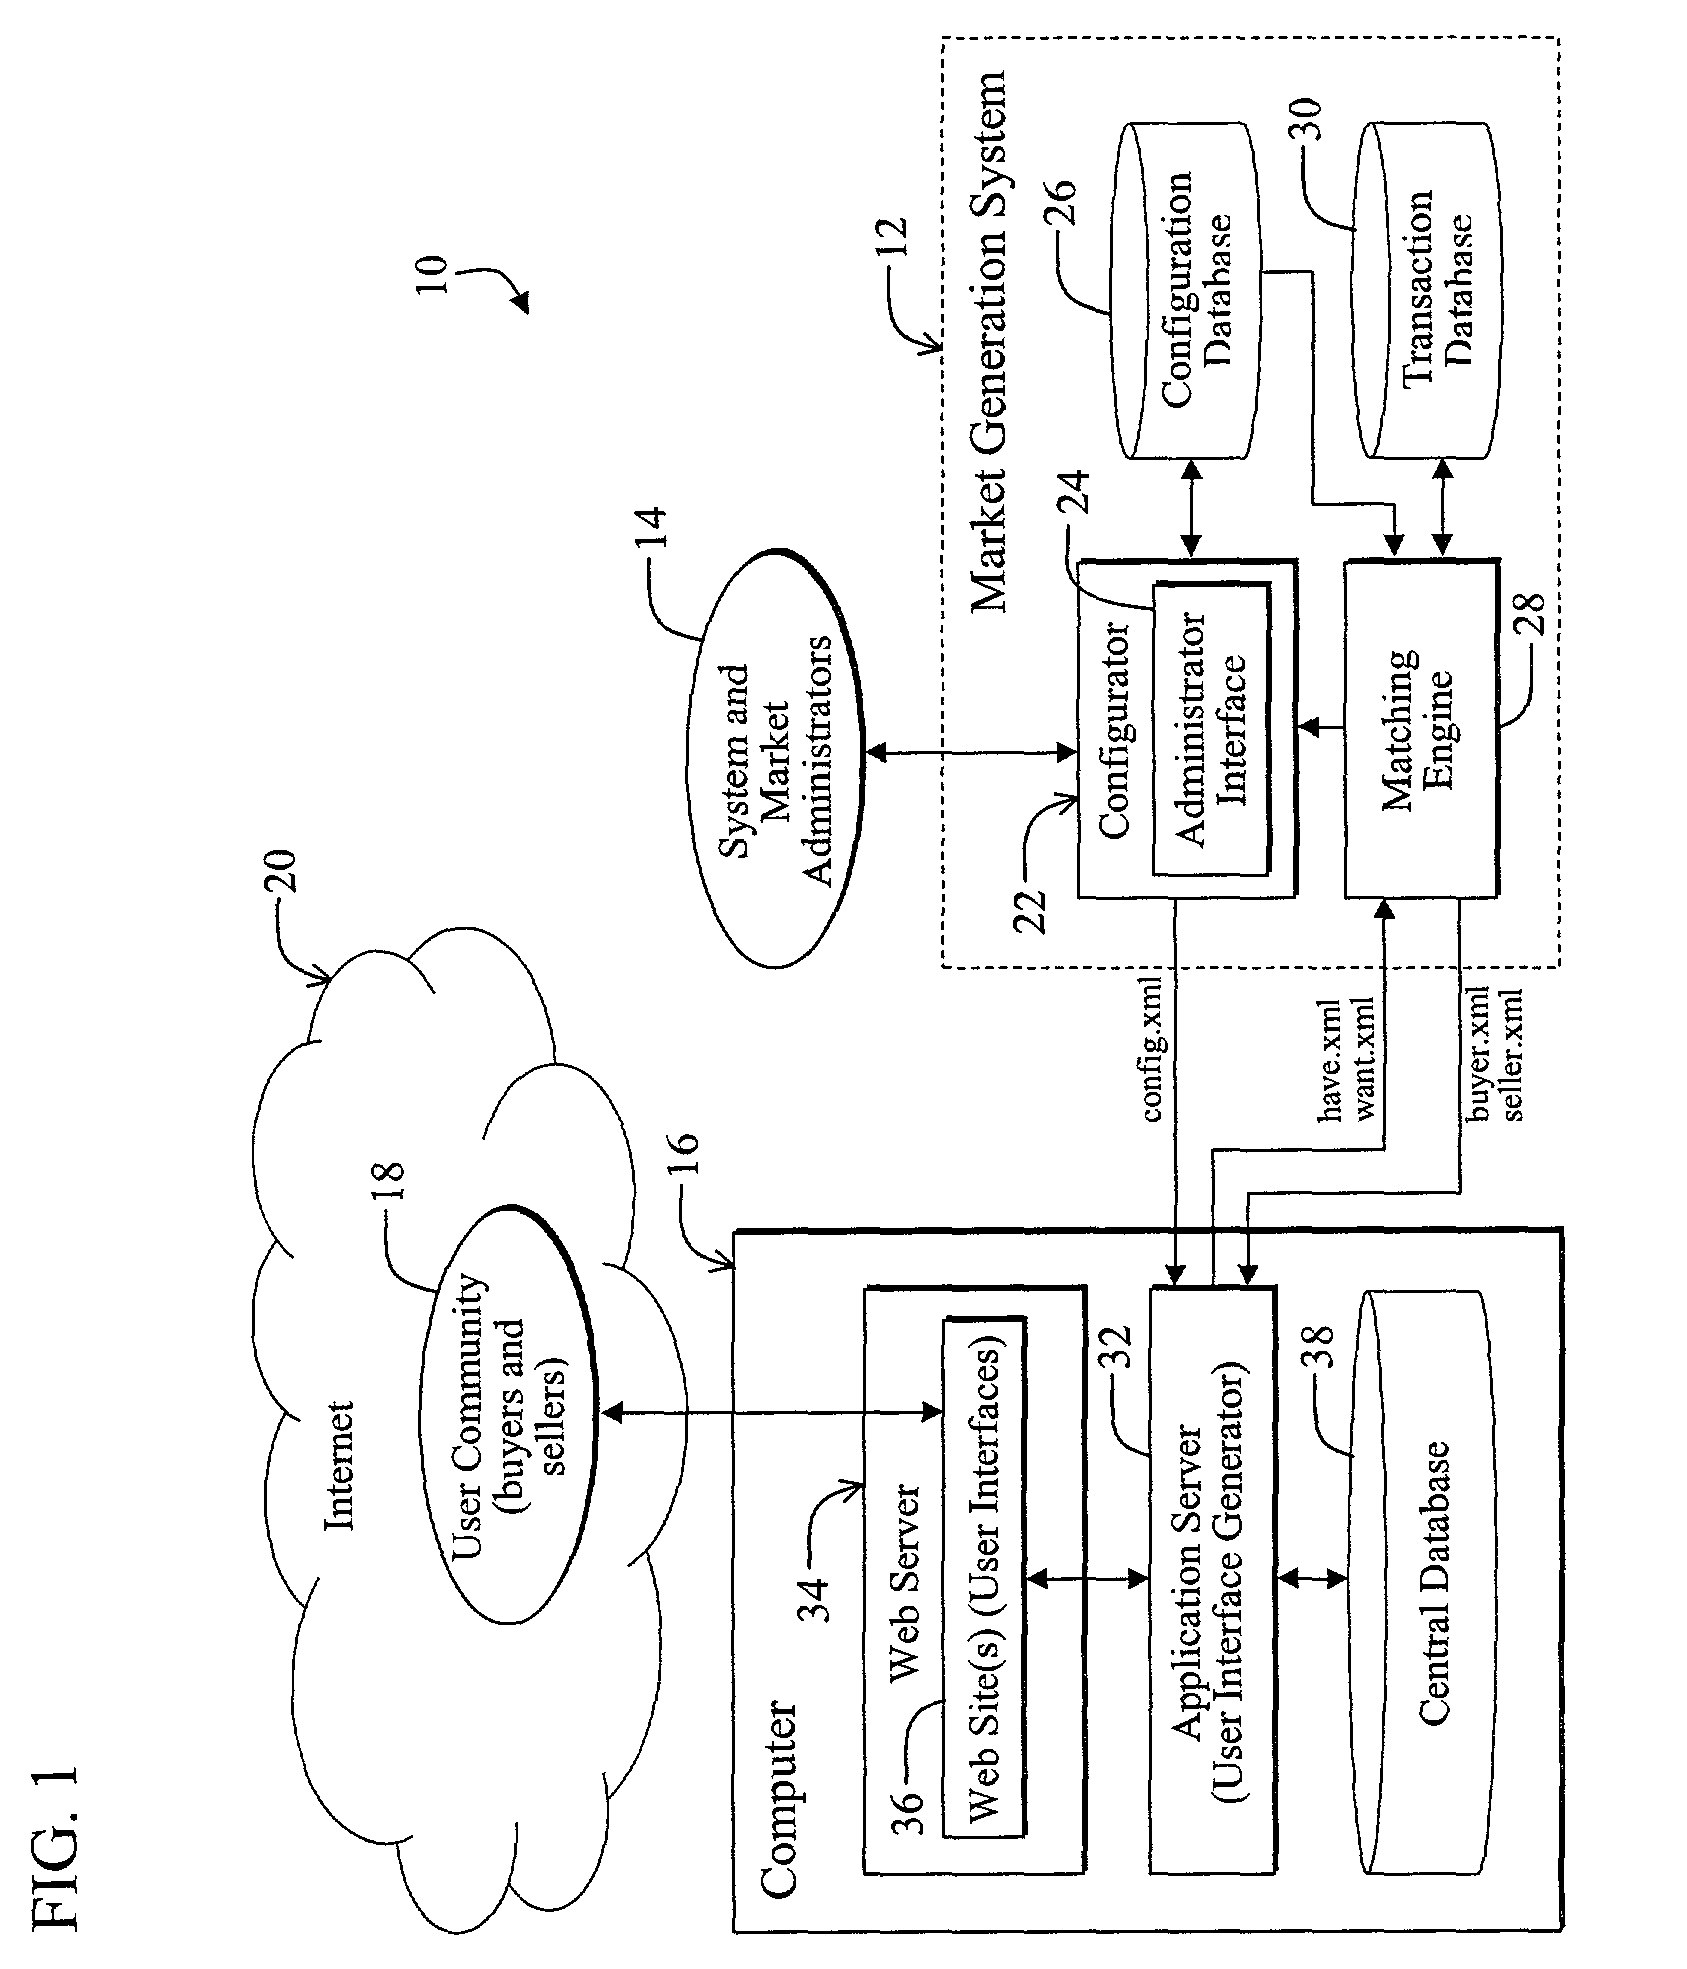 System and method for implementing electronic markets